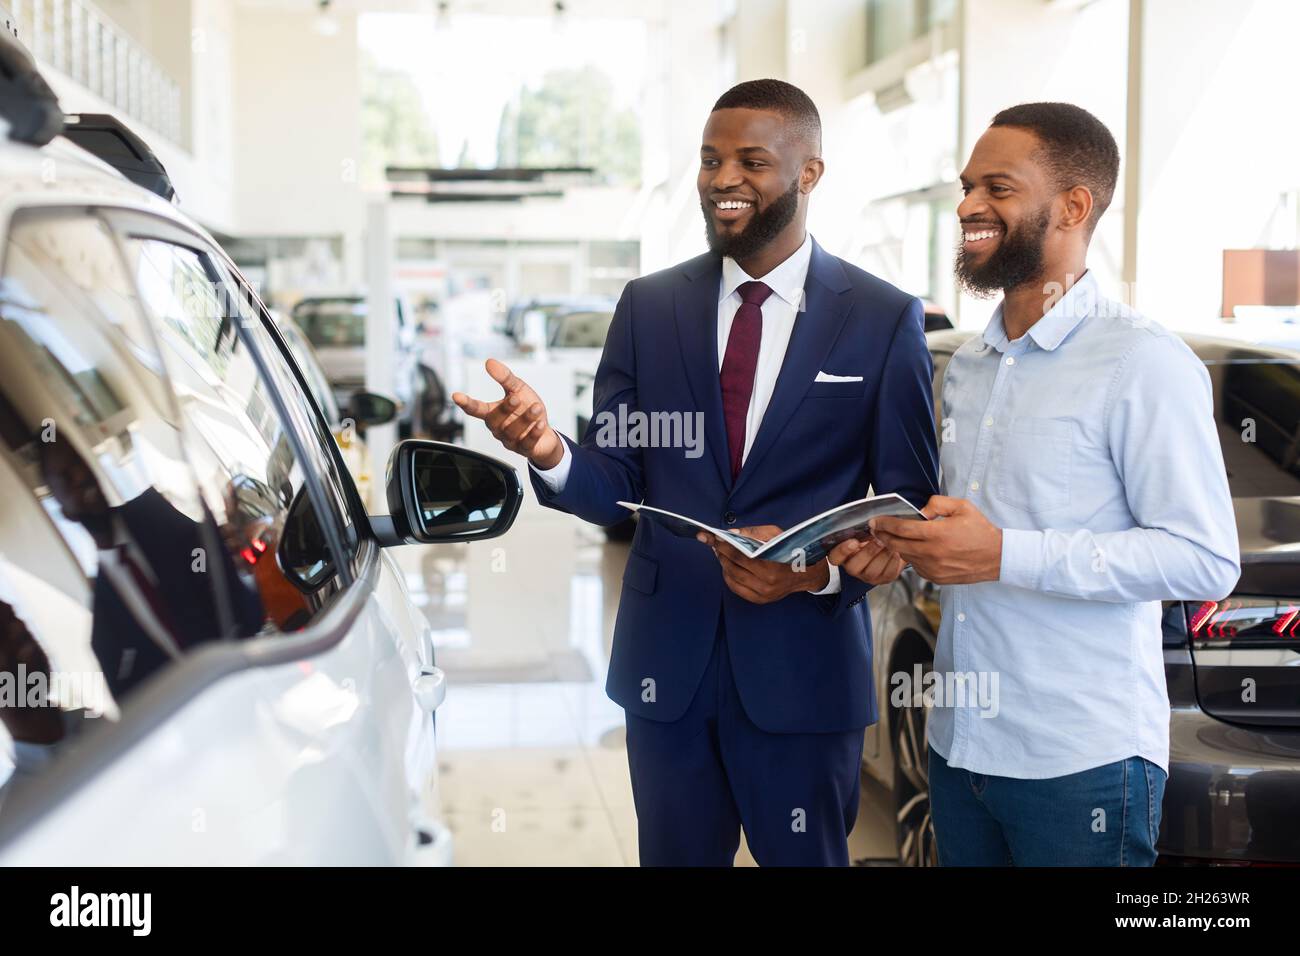 Black Salesman Advertising New Automobile To Male Customer In Car Dealership Center Stock Photo